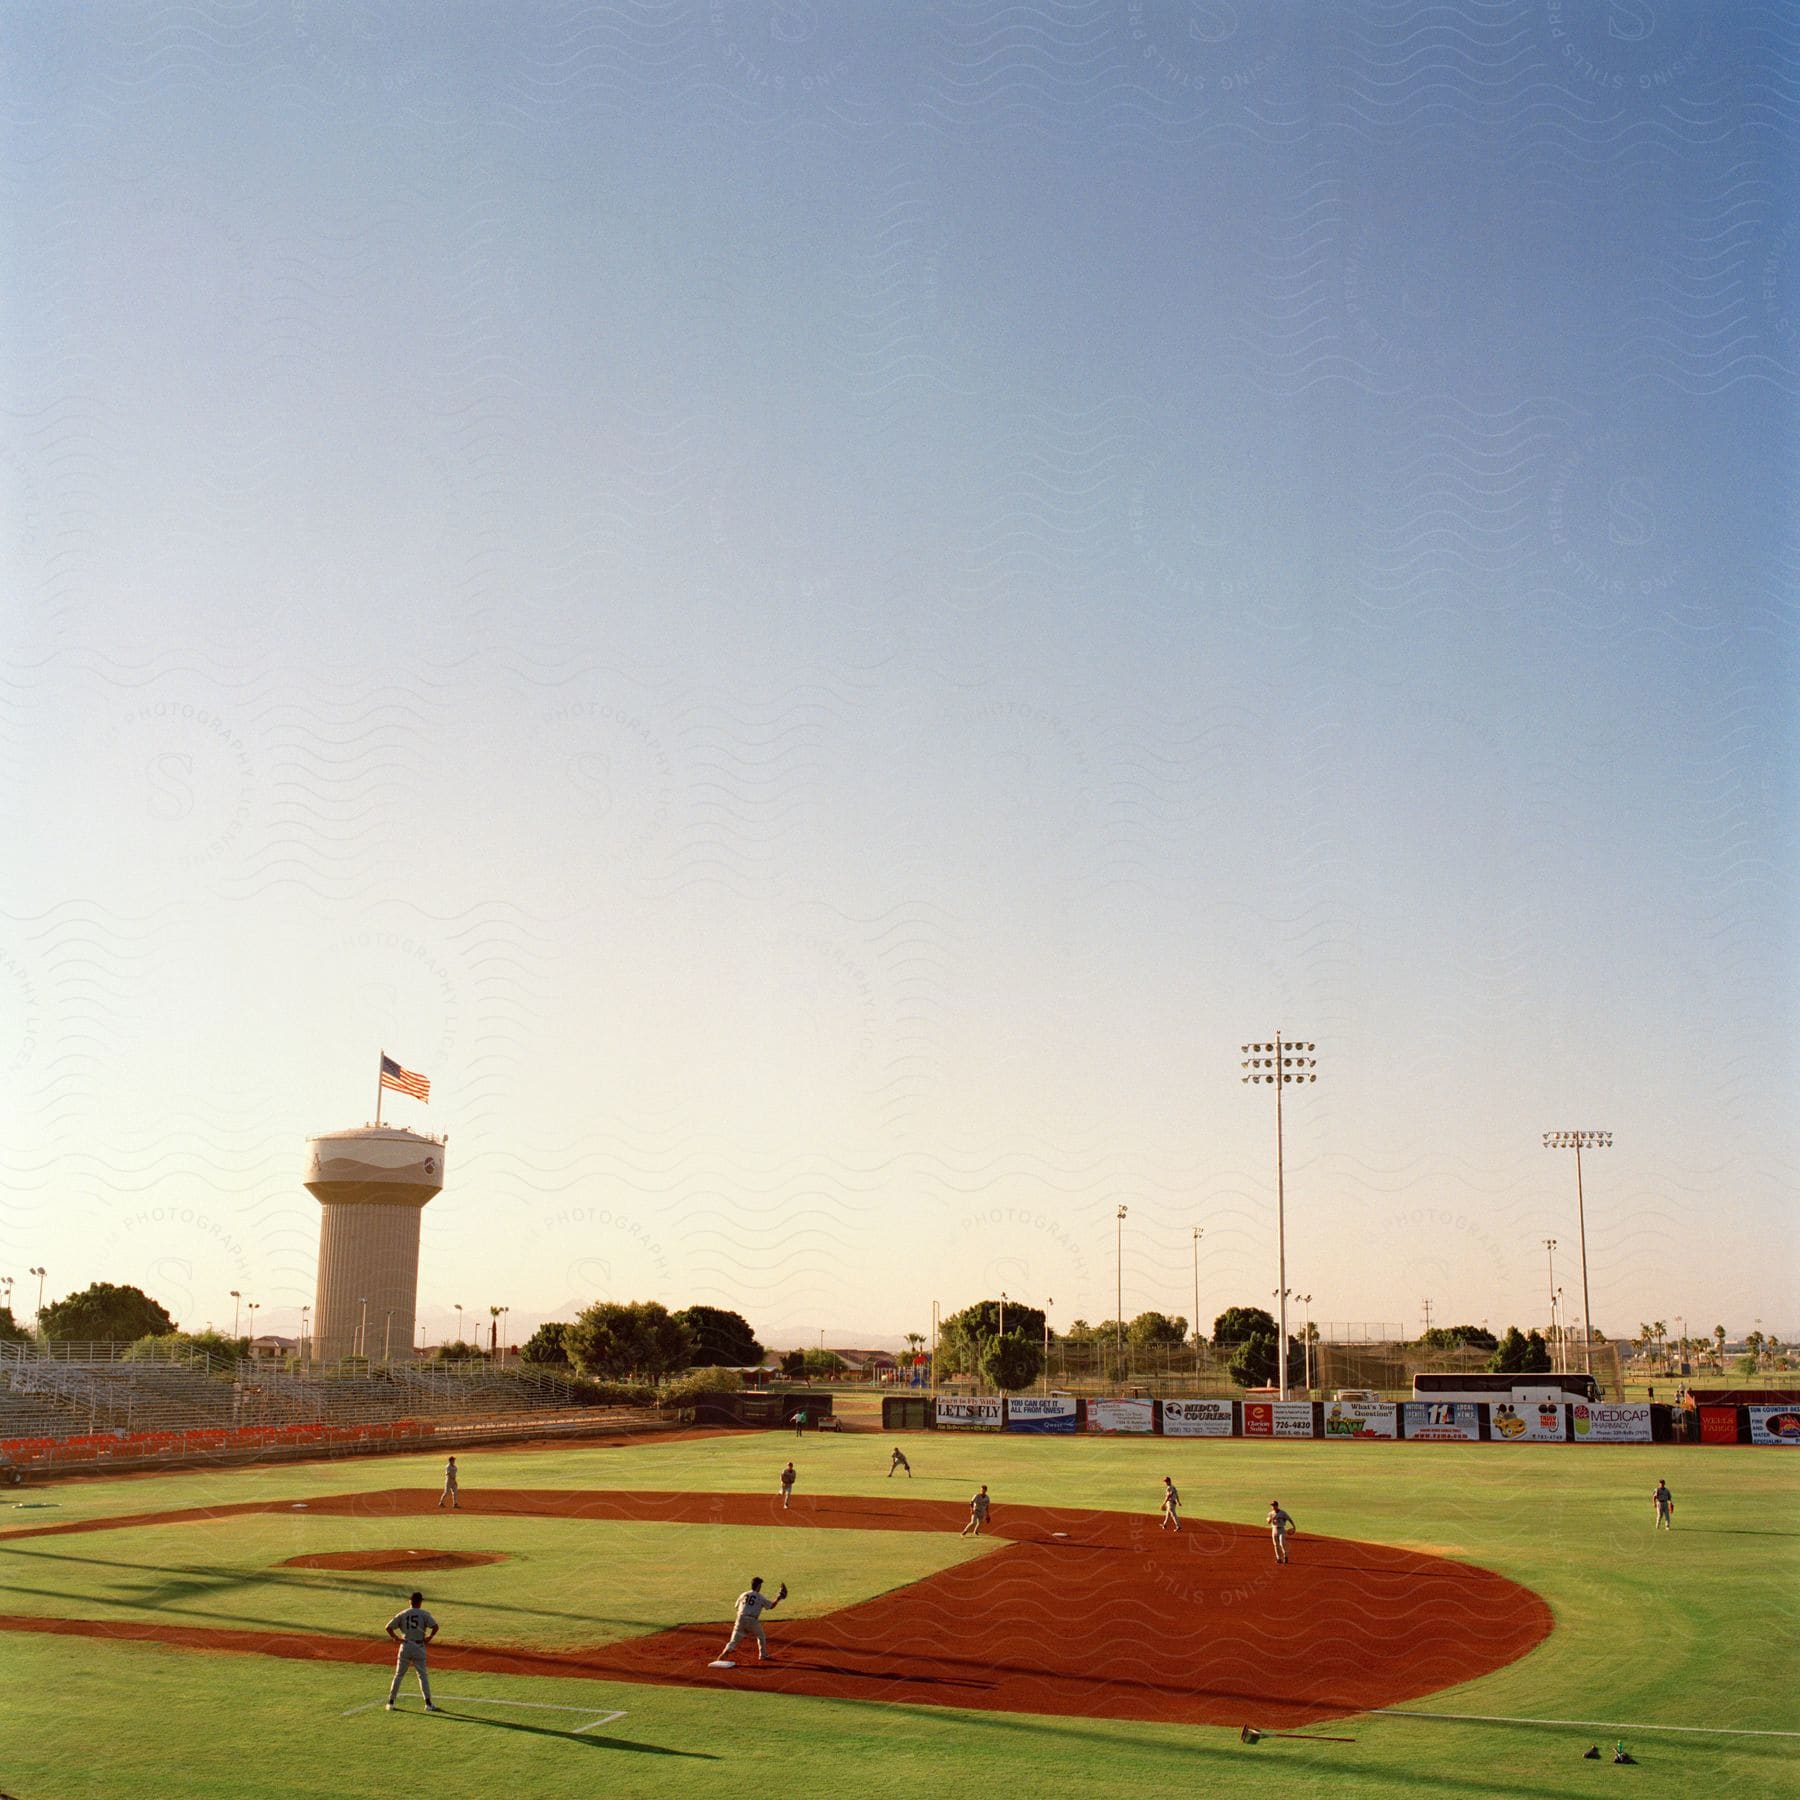 A baseball team practices playing on a baseball field on a sunny day with a cloudless blue sky